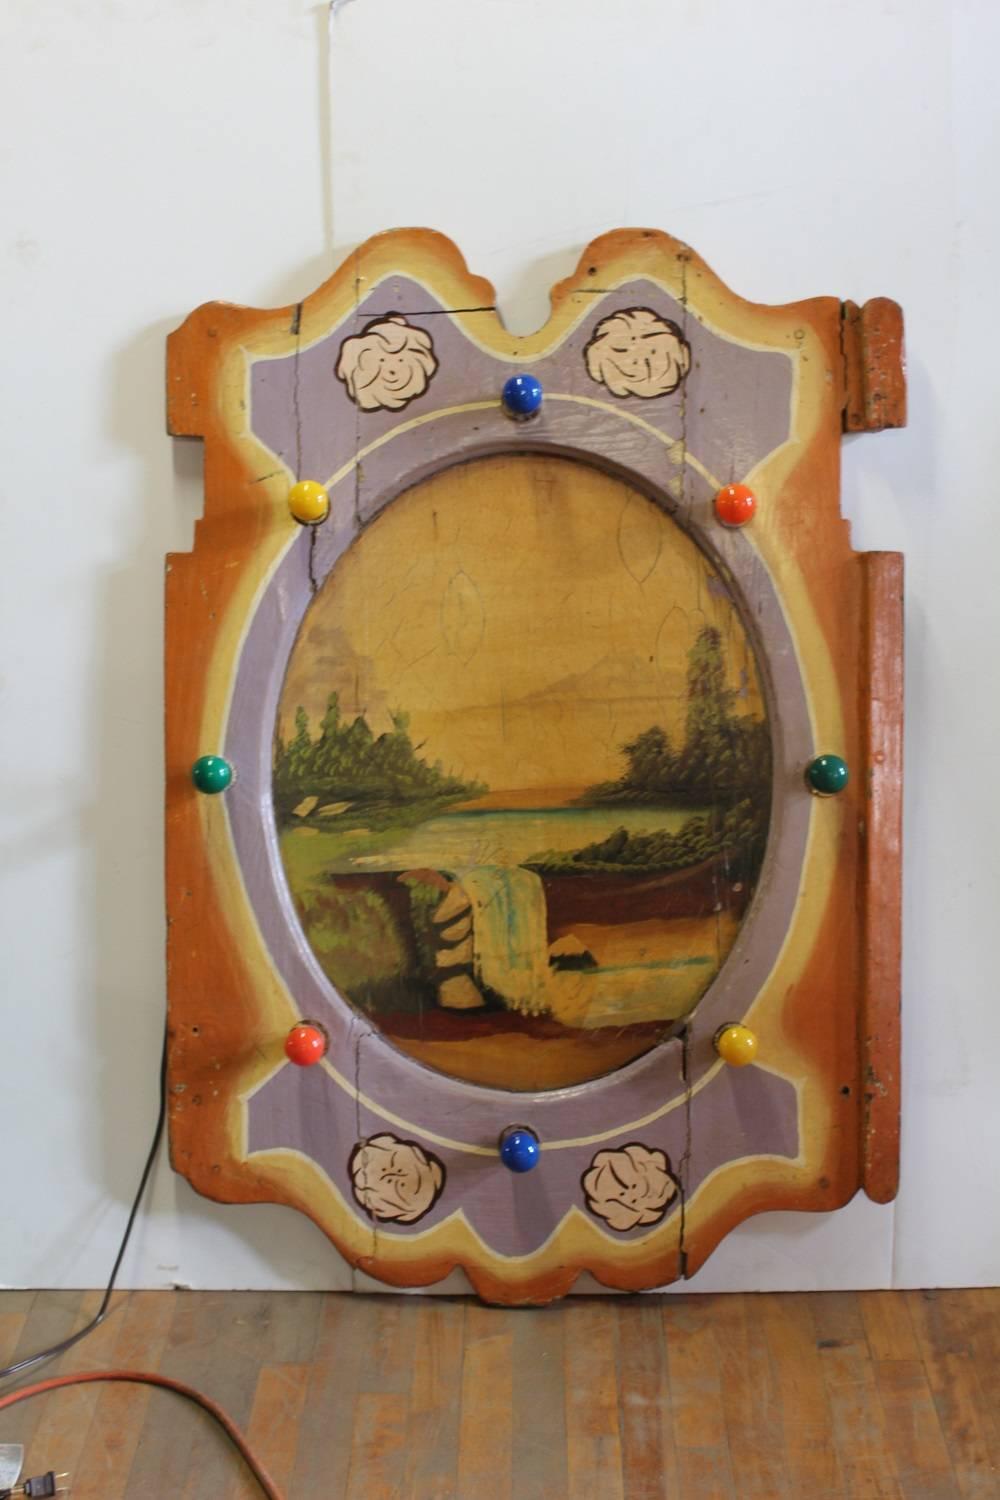 1930s American carnival light up hand-painted wood board. We have six boards available. Each board has different landscape painting.